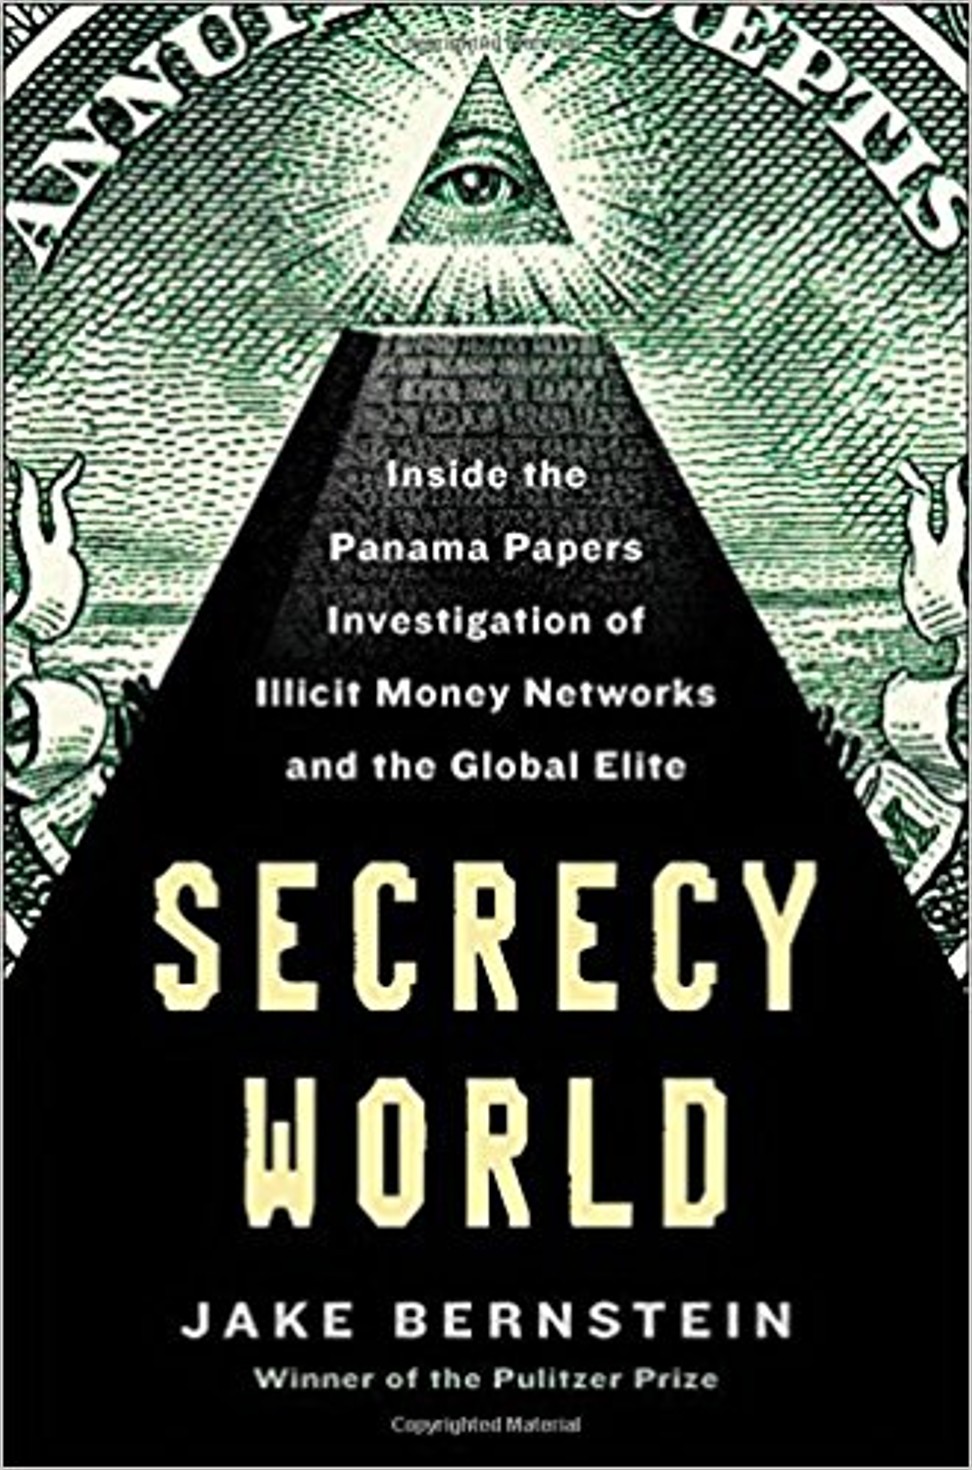 The cover of Secrecy World.